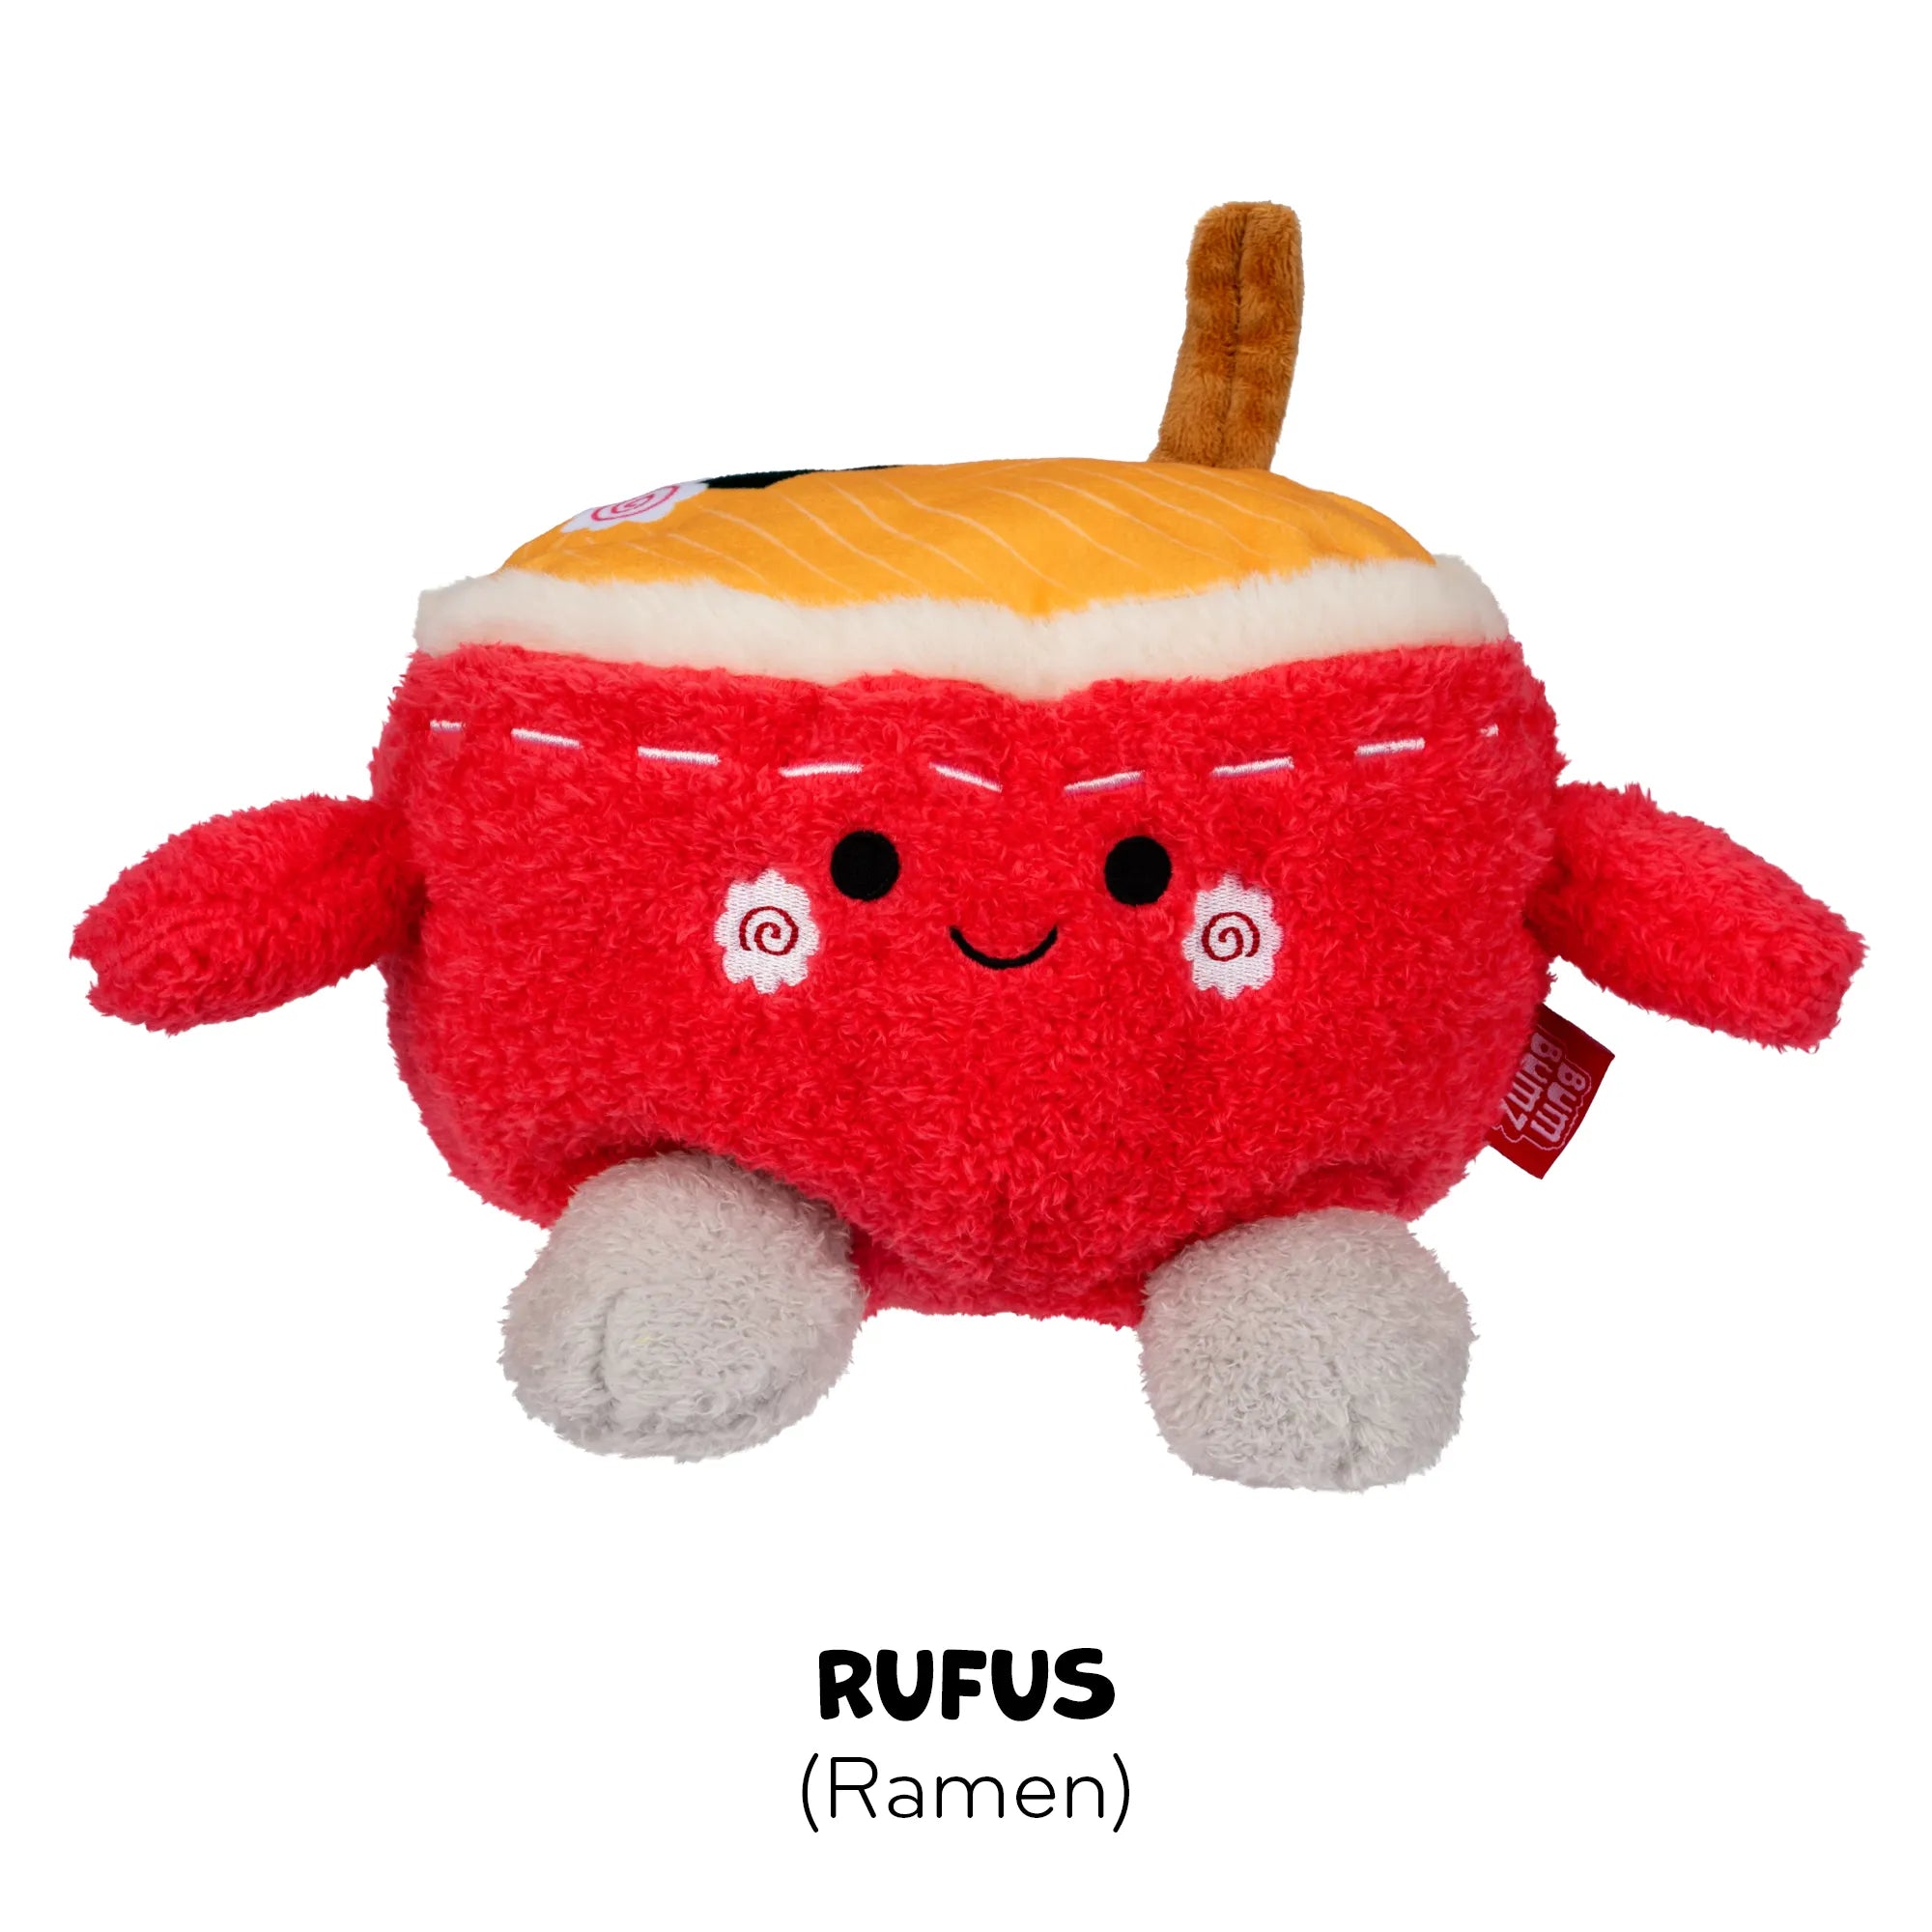 BumBumz Takeout Series - 7.5” Collectibles - Ramen 'Rufus - Ages 3-Adult - Brown's Hobby & Game